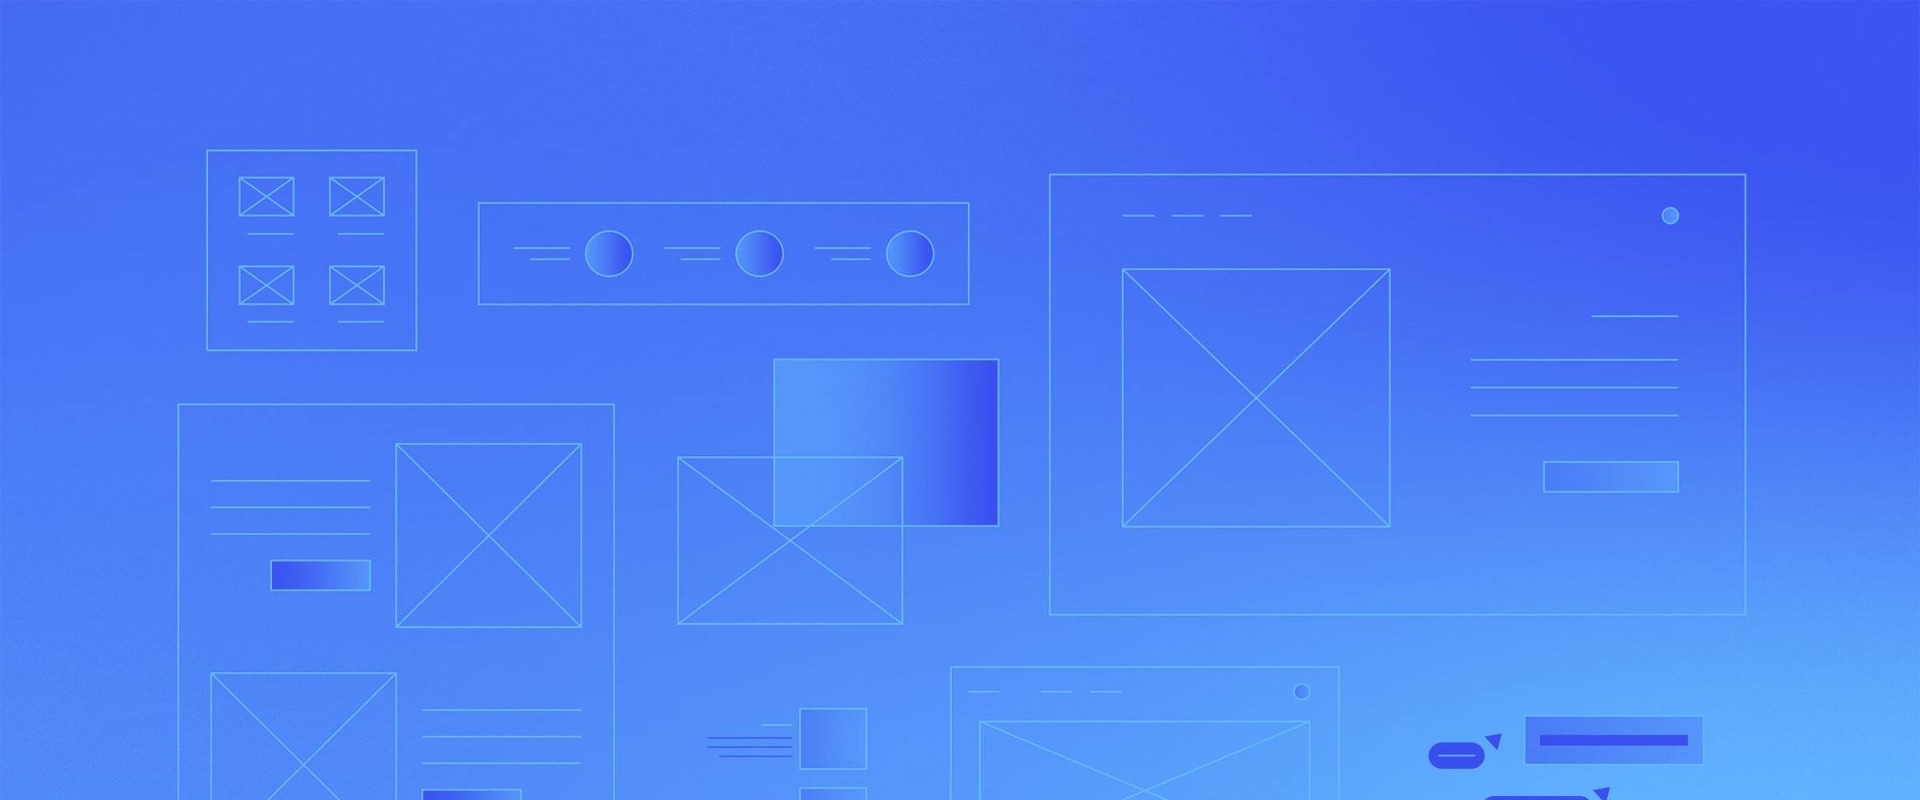 A Complete Guide to Wireframing and Prototyping Tools for Web Design